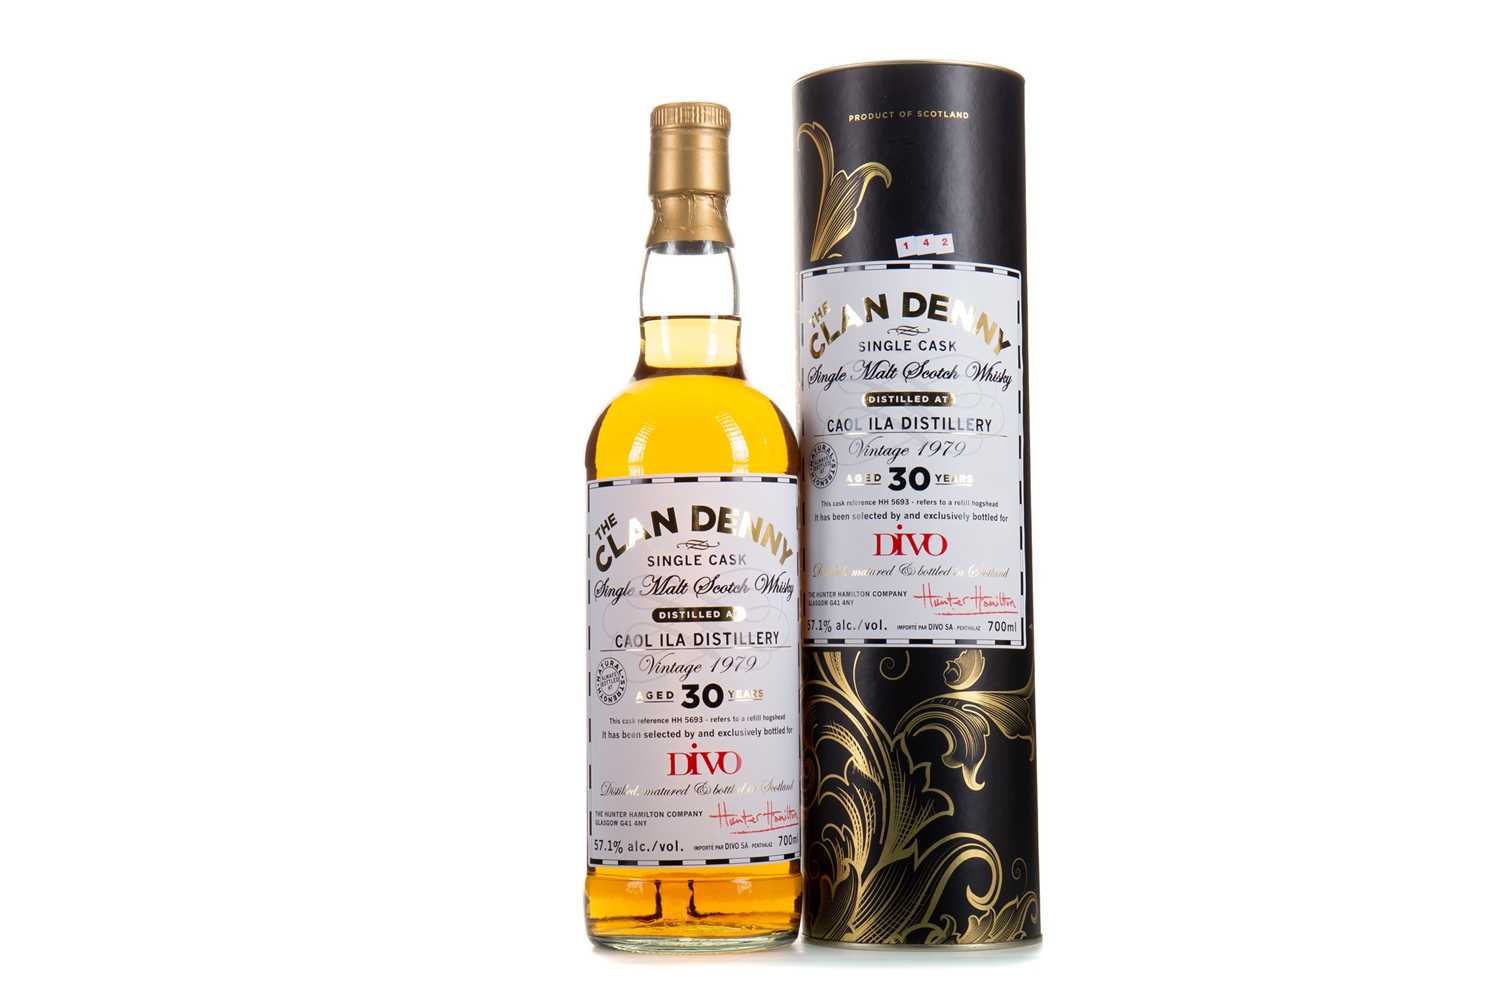 Lot 364 - CAOL ILA 1979 30 YEAR OLD CLAN DENNY FOR DIVO